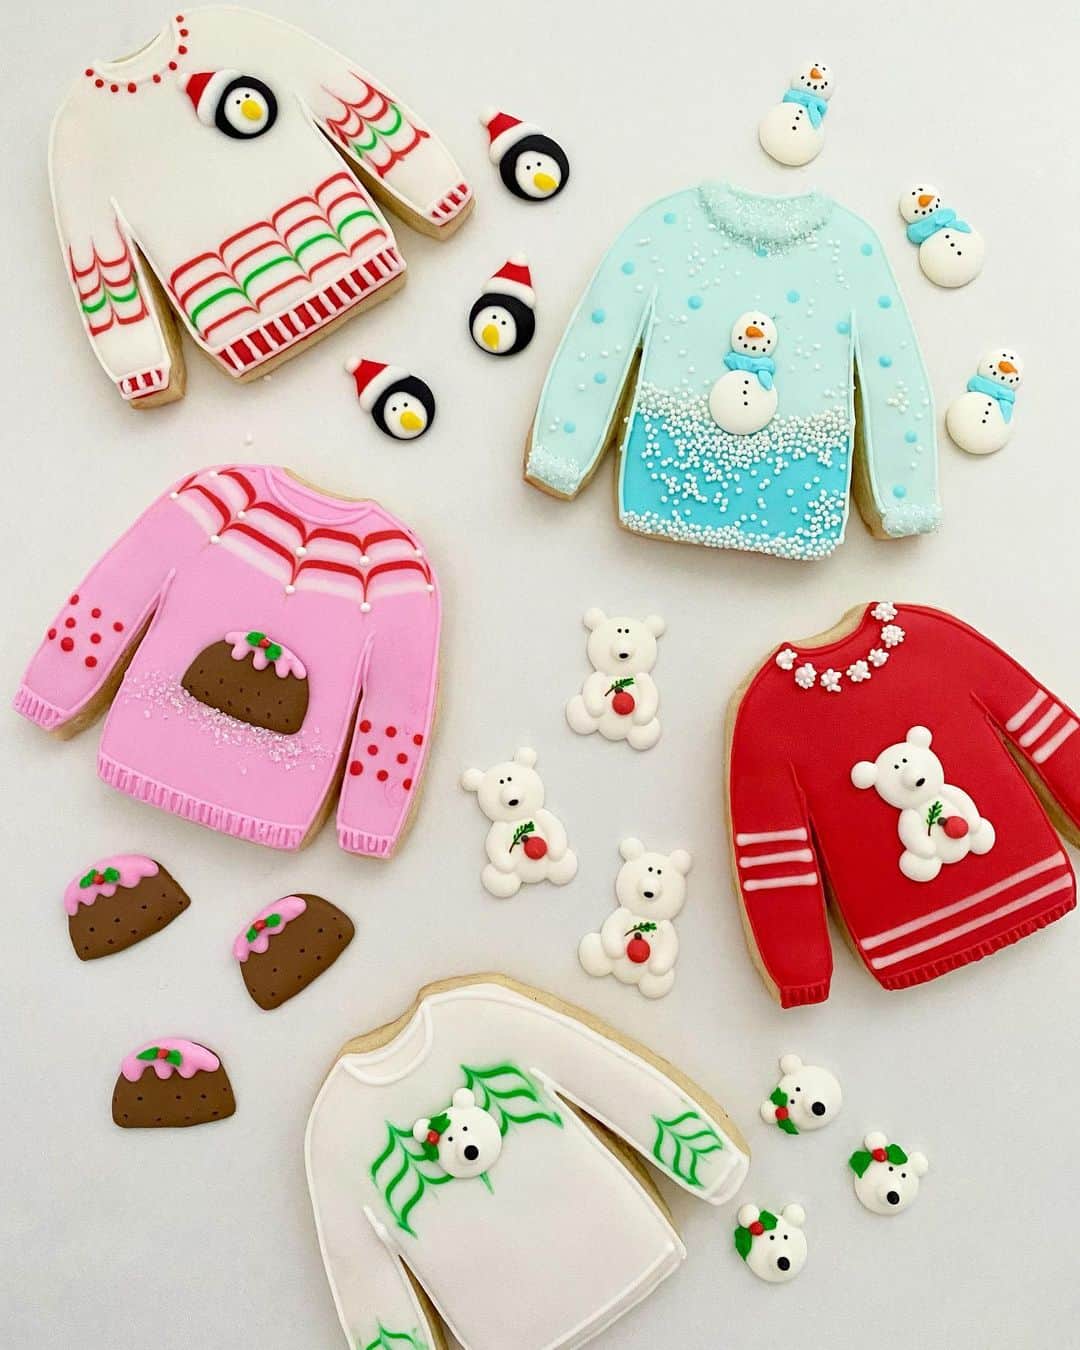 Festive Christmas Cookie Decoration Examples by Dough & Batter